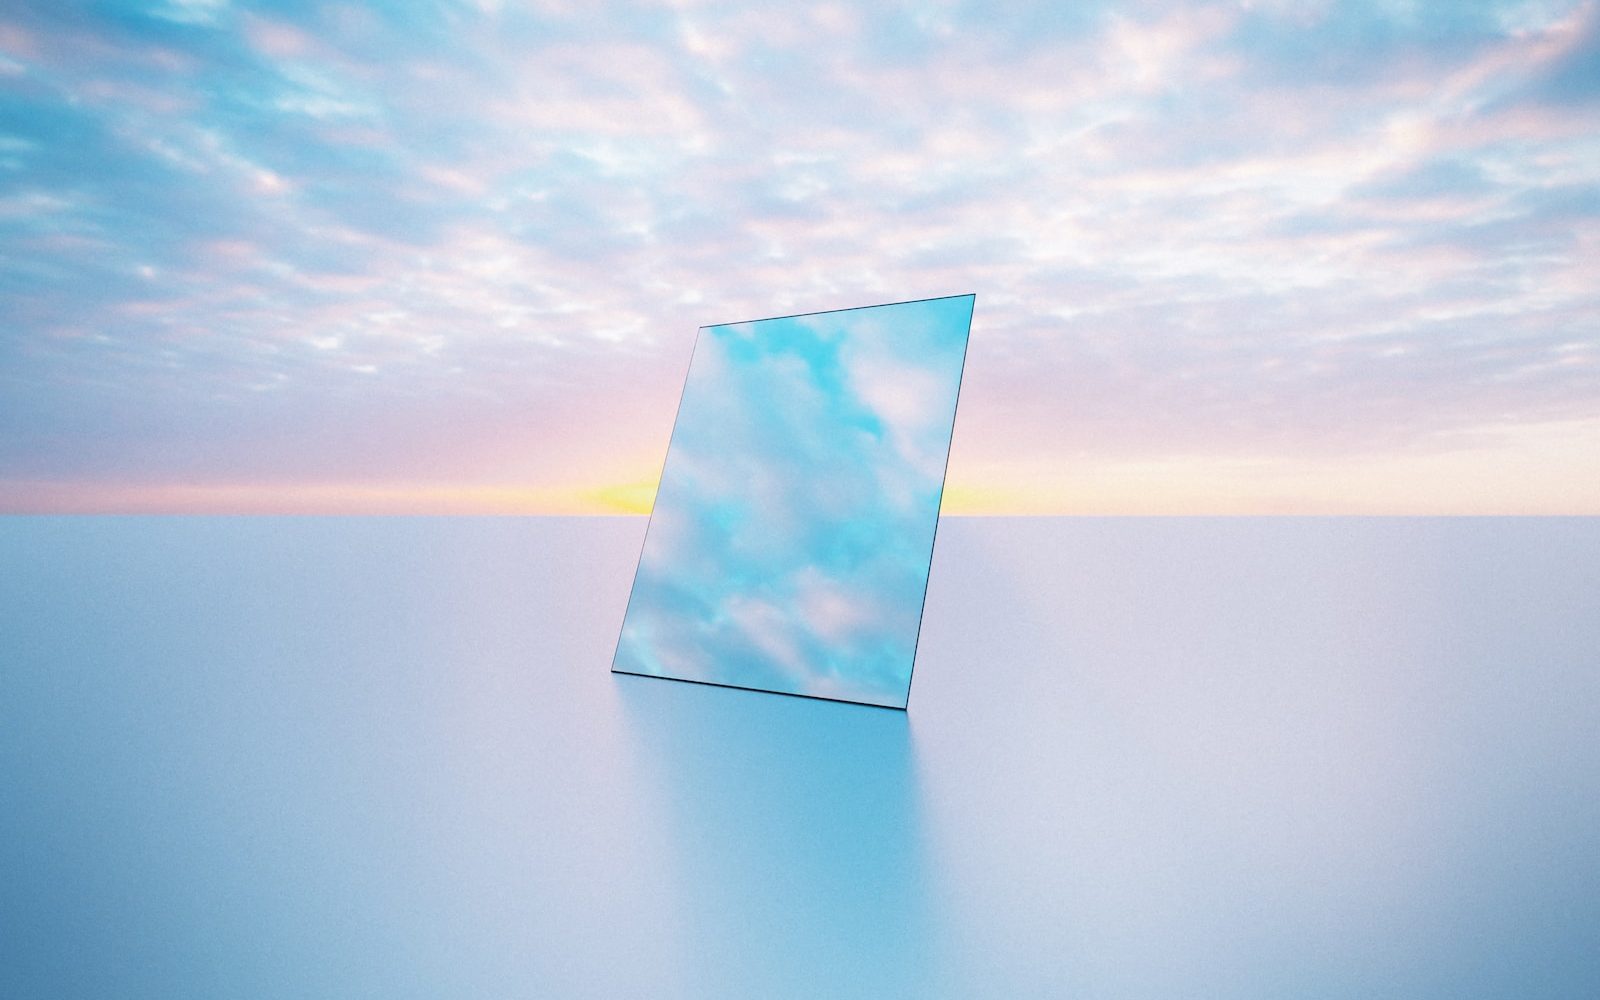 a mirror sitting on top of a table under a cloudy sky